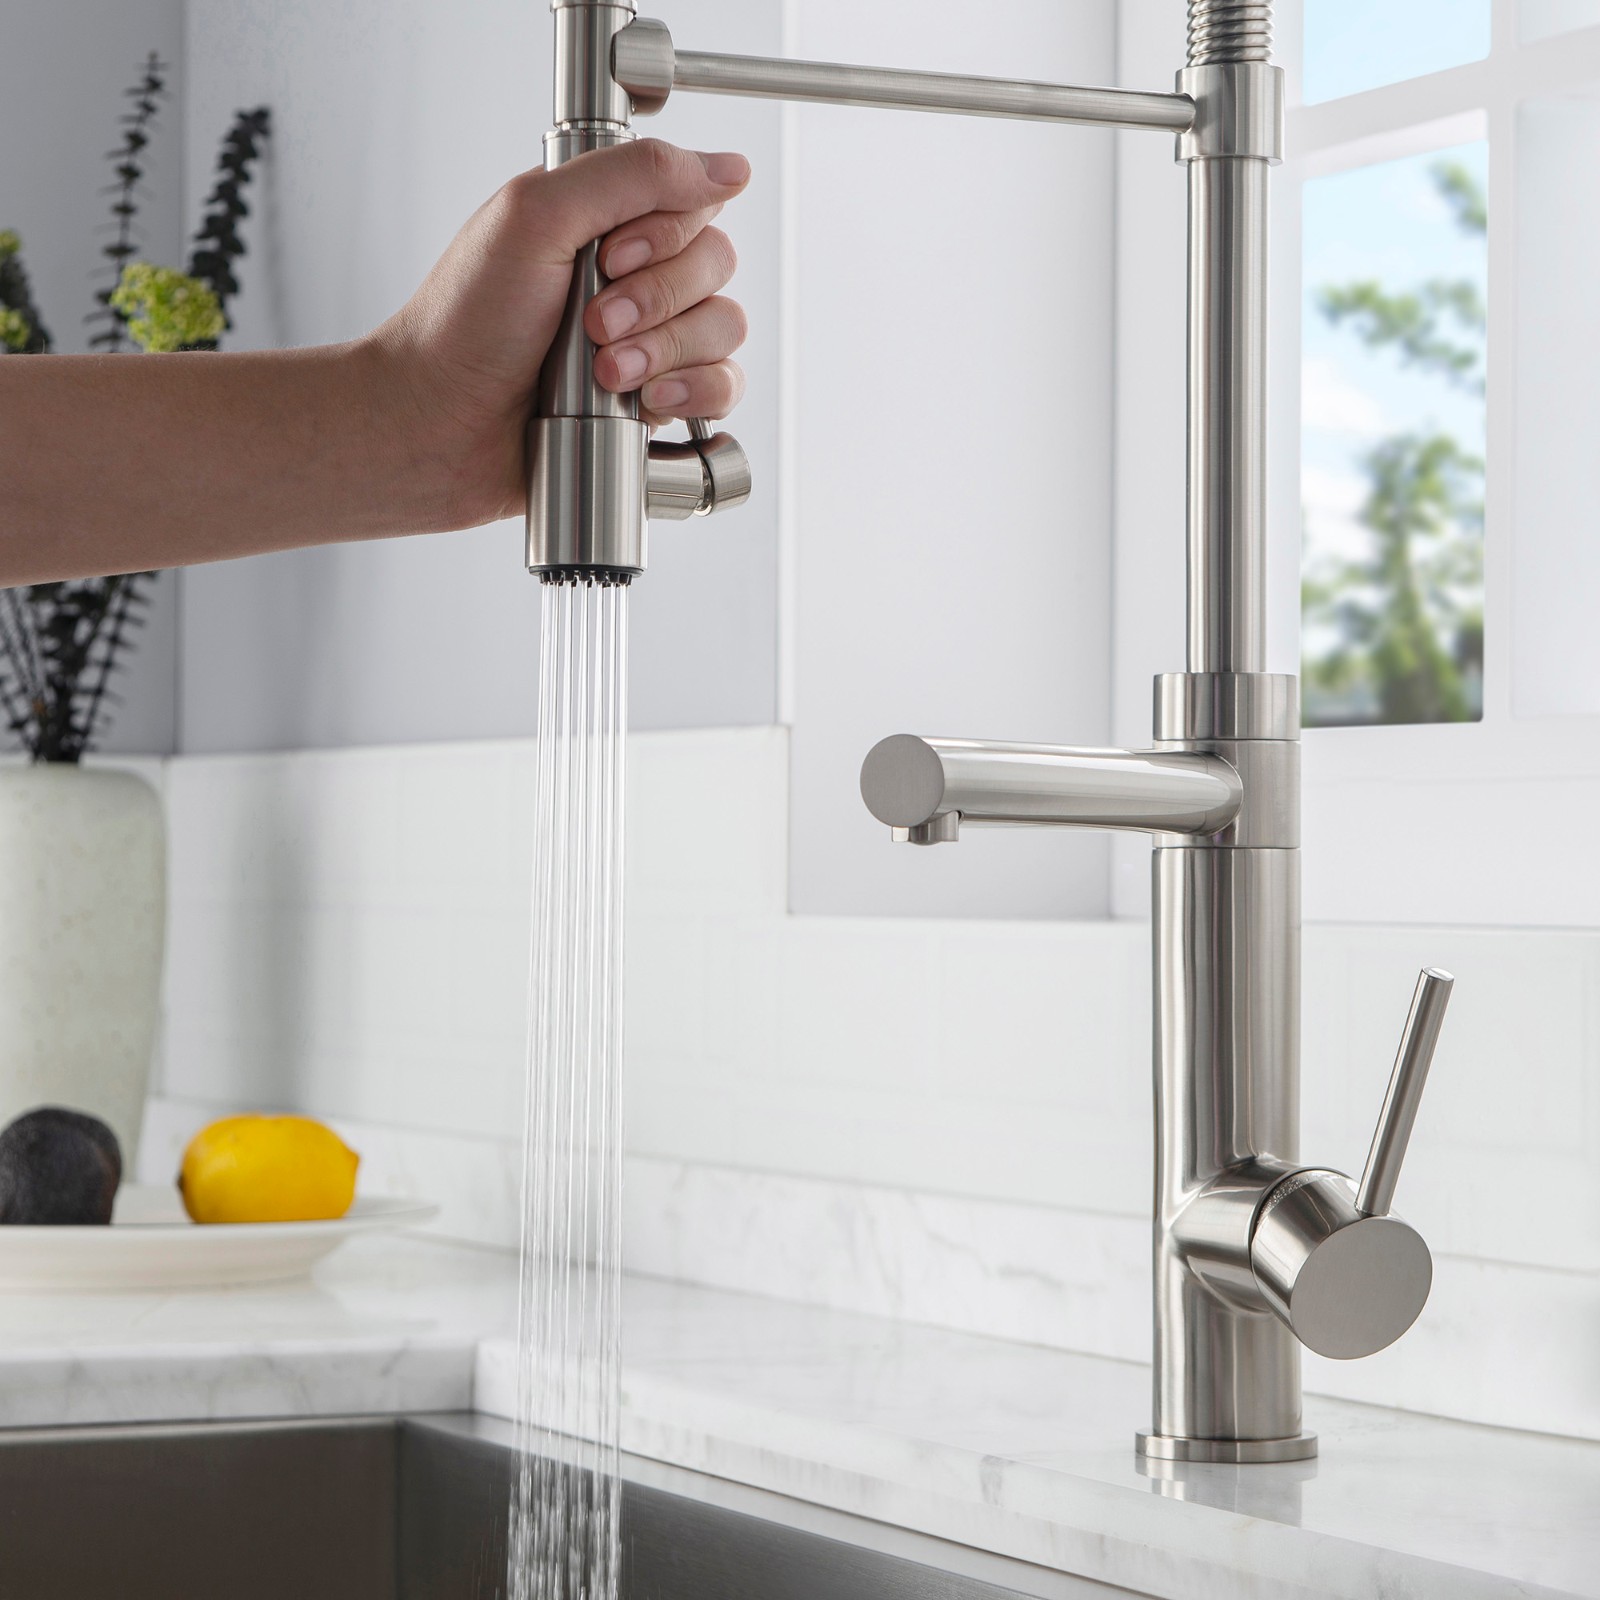  WOODBRIDGE WK060501BN Stainless Steel Single Handle Pre-Rinse Pull Down Kitchen Faucet and Pot Filler in Brushed Nickel Finish._5243